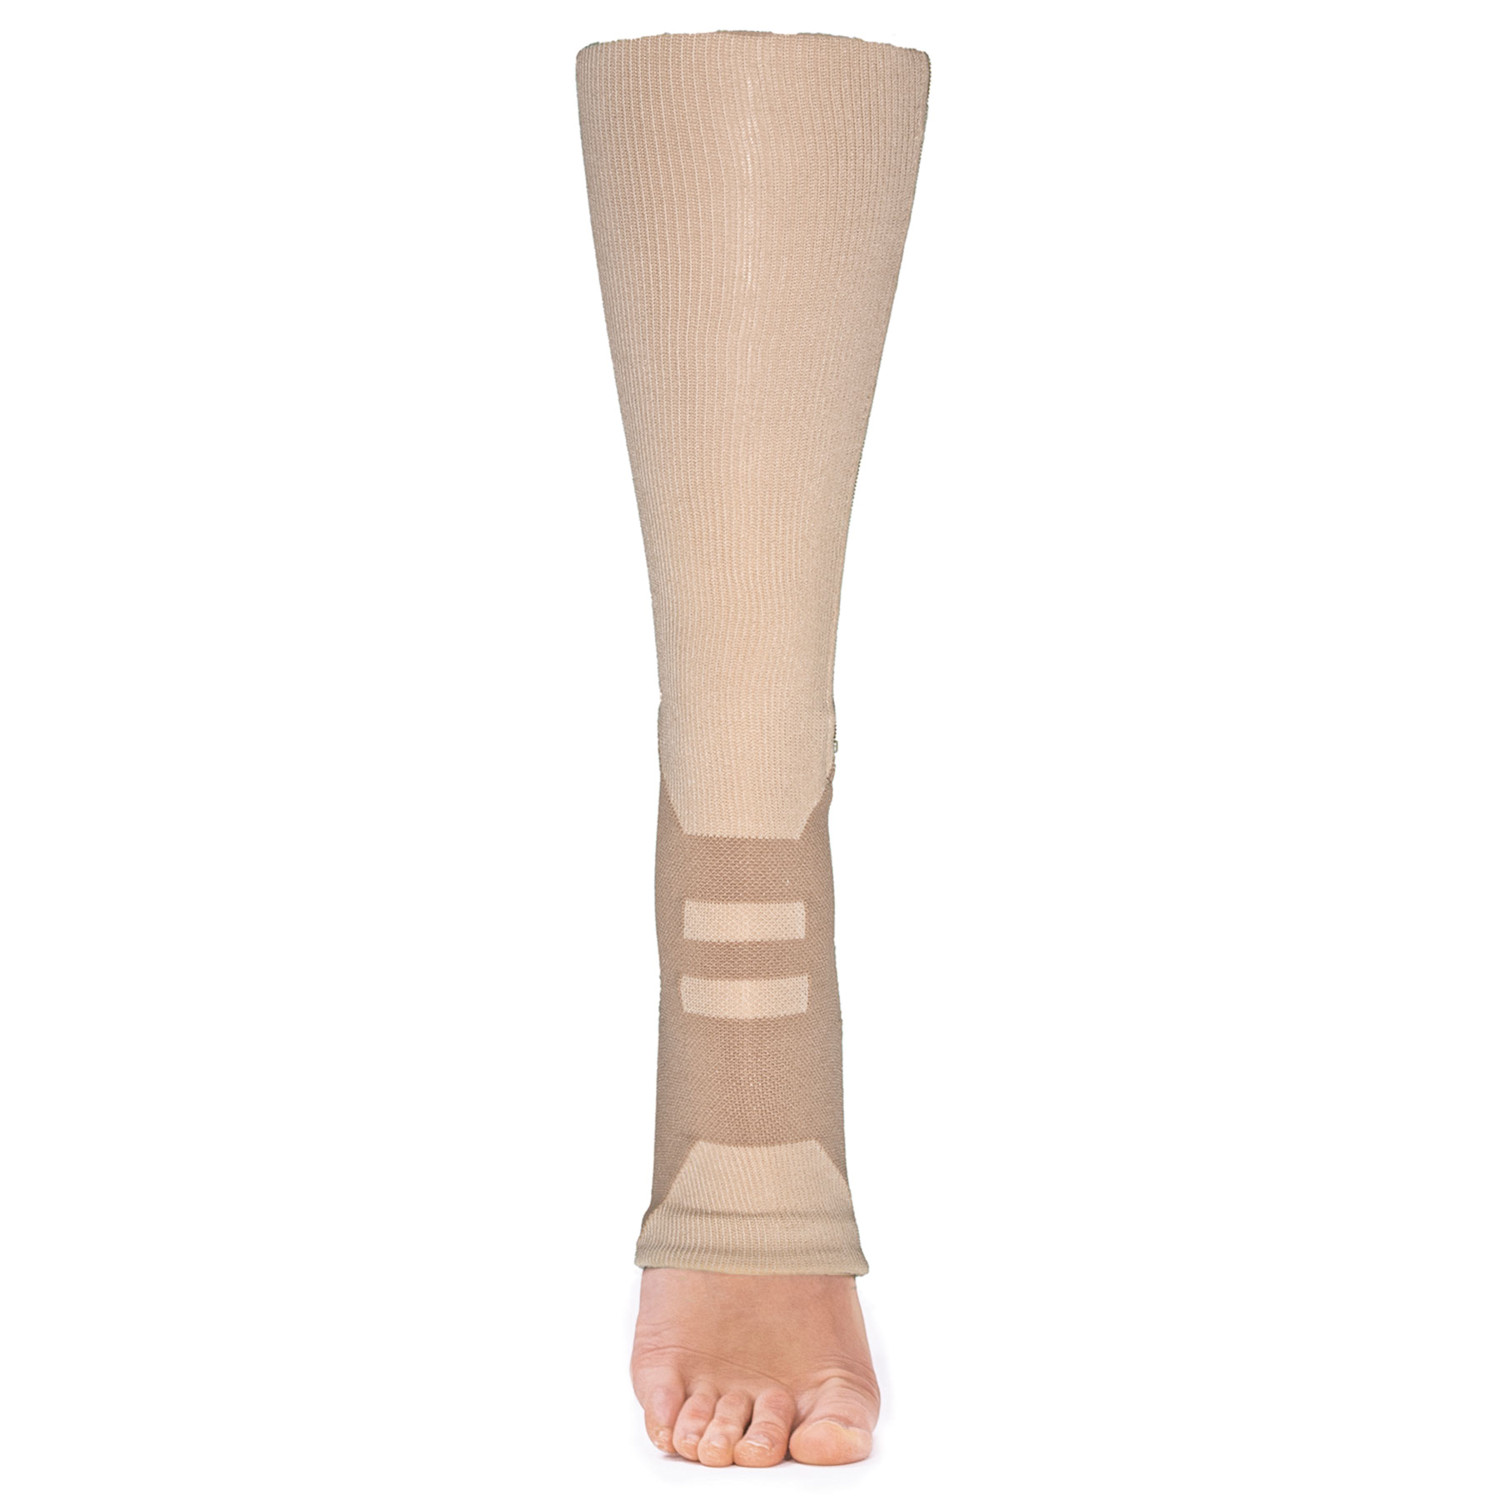 Benefits of compression socks for arch support - stonehety